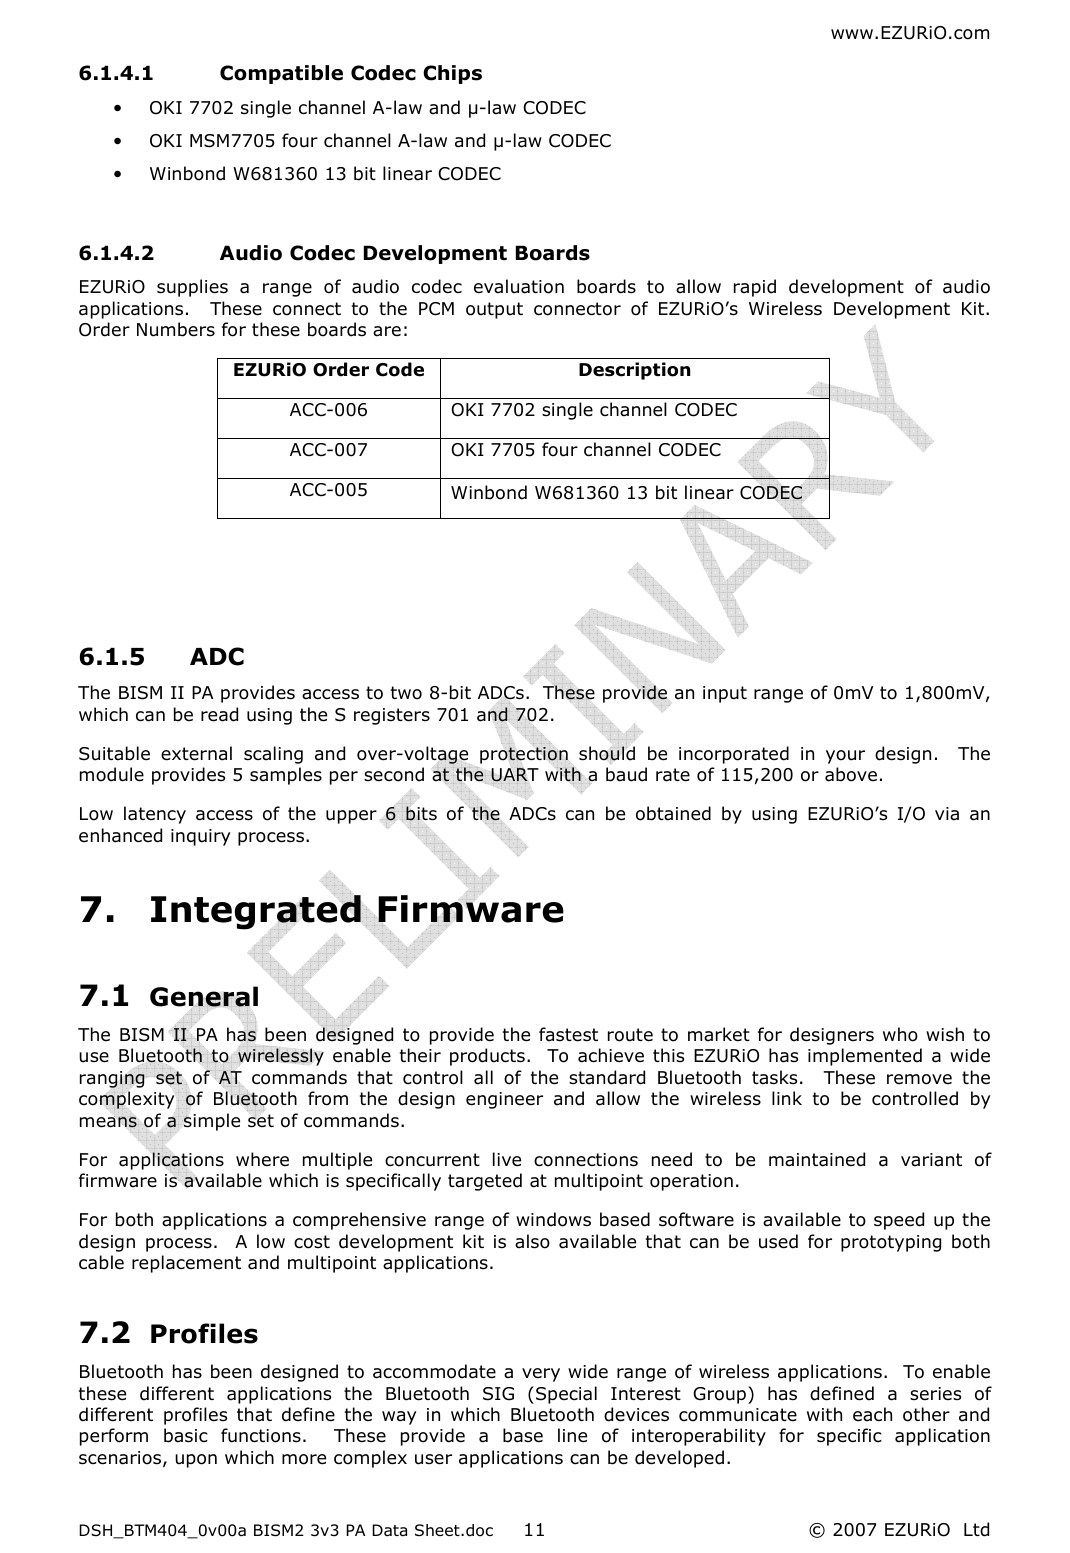 www.EZURiO.com DSH_BTM404_0v00a BISM2 3v3 PA Data Sheet.doc  © 2007 EZURiO  Ltd  116.1.4.1 Compatible Codec Chips • OKI 7702 single channel A-law and µ-law CODEC • OKI MSM7705 four channel A-law and µ-law CODEC • Winbond W681360 13 bit linear CODEC  6.1.4.2 Audio Codec Development Boards EZURiO  supplies  a  range  of  audio  codec  evaluation  boards  to  allow  rapid  development  of  audio applications.    These  connect  to  the  PCM  output  connector  of  EZURiO’s  Wireless  Development  Kit.  Order Numbers for these boards are: EZURiO Order Code  Description ACC-006  OKI 7702 single channel CODEC ACC-007  OKI 7705 four channel CODEC ACC-005  Winbond W681360 13 bit linear CODEC    6.1.5 ADC The BISM II PA provides access to two 8-bit ADCs.  These provide an input range of 0mV to 1,800mV, which can be read using the S registers 701 and 702. Suitable  external  scaling  and  over-voltage  protection  should  be  incorporated  in  your  design.    The module provides 5 samples per second at the UART with a baud rate of 115,200 or above.  Low  latency  access  of  the  upper  6  bits  of  the  ADCs  can  be  obtained  by  using  EZURiO’s  I/O  via  an enhanced inquiry process. 7. Integrated Firmware 7.1 General The BISM II PA has been designed to provide the fastest route to market for designers who wish to use  Bluetooth to  wirelessly enable their products.  To achieve this EZURiO has implemented a wide ranging  set  of  AT  commands  that  control  all  of  the  standard  Bluetooth  tasks.    These  remove  the complexity  of  Bluetooth  from  the  design  engineer  and  allow  the  wireless  link  to  be  controlled  by means of a simple set of commands. For  applications  where  multiple  concurrent  live  connections  need  to  be  maintained  a  variant  of firmware is available which is specifically targeted at multipoint operation. For both applications a comprehensive range of windows based software is available to speed up the design  process.    A low cost development  kit  is also available that can be used  for prototyping both cable replacement and multipoint applications. 7.2 Profiles Bluetooth has been designed to accommodate a very wide range of wireless applications.  To enable these  different  applications  the  Bluetooth  SIG  (Special  Interest  Group)  has  defined  a  series  of different  profiles  that  define  the  way  in  which  Bluetooth  devices  communicate  with  each  other  and perform  basic  functions.    These  provide  a  base  line  of  interoperability  for  specific  application scenarios, upon which more complex user applications can be developed. 